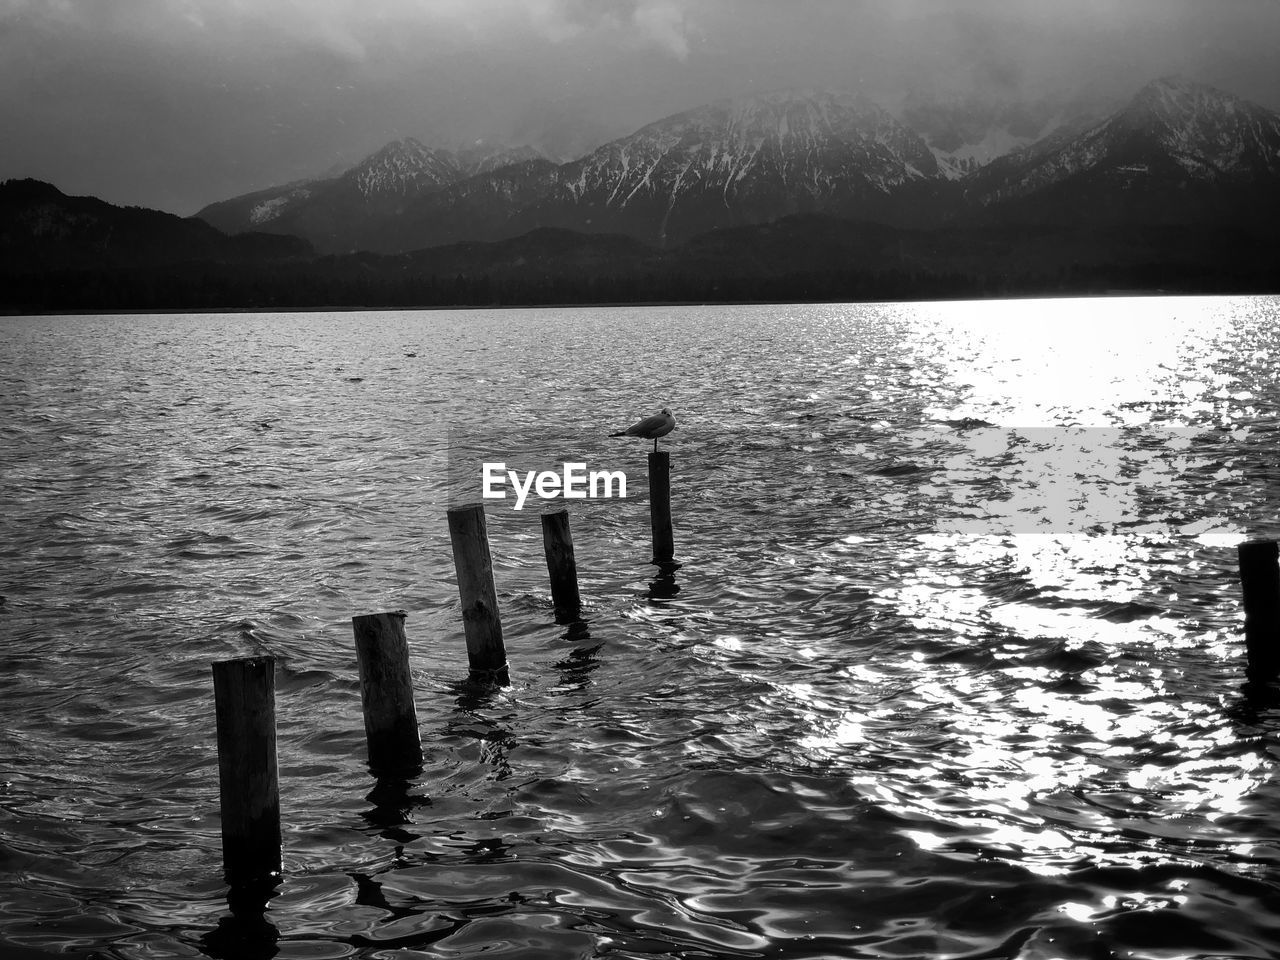 WOODEN POST IN LAKE AGAINST MOUNTAINS